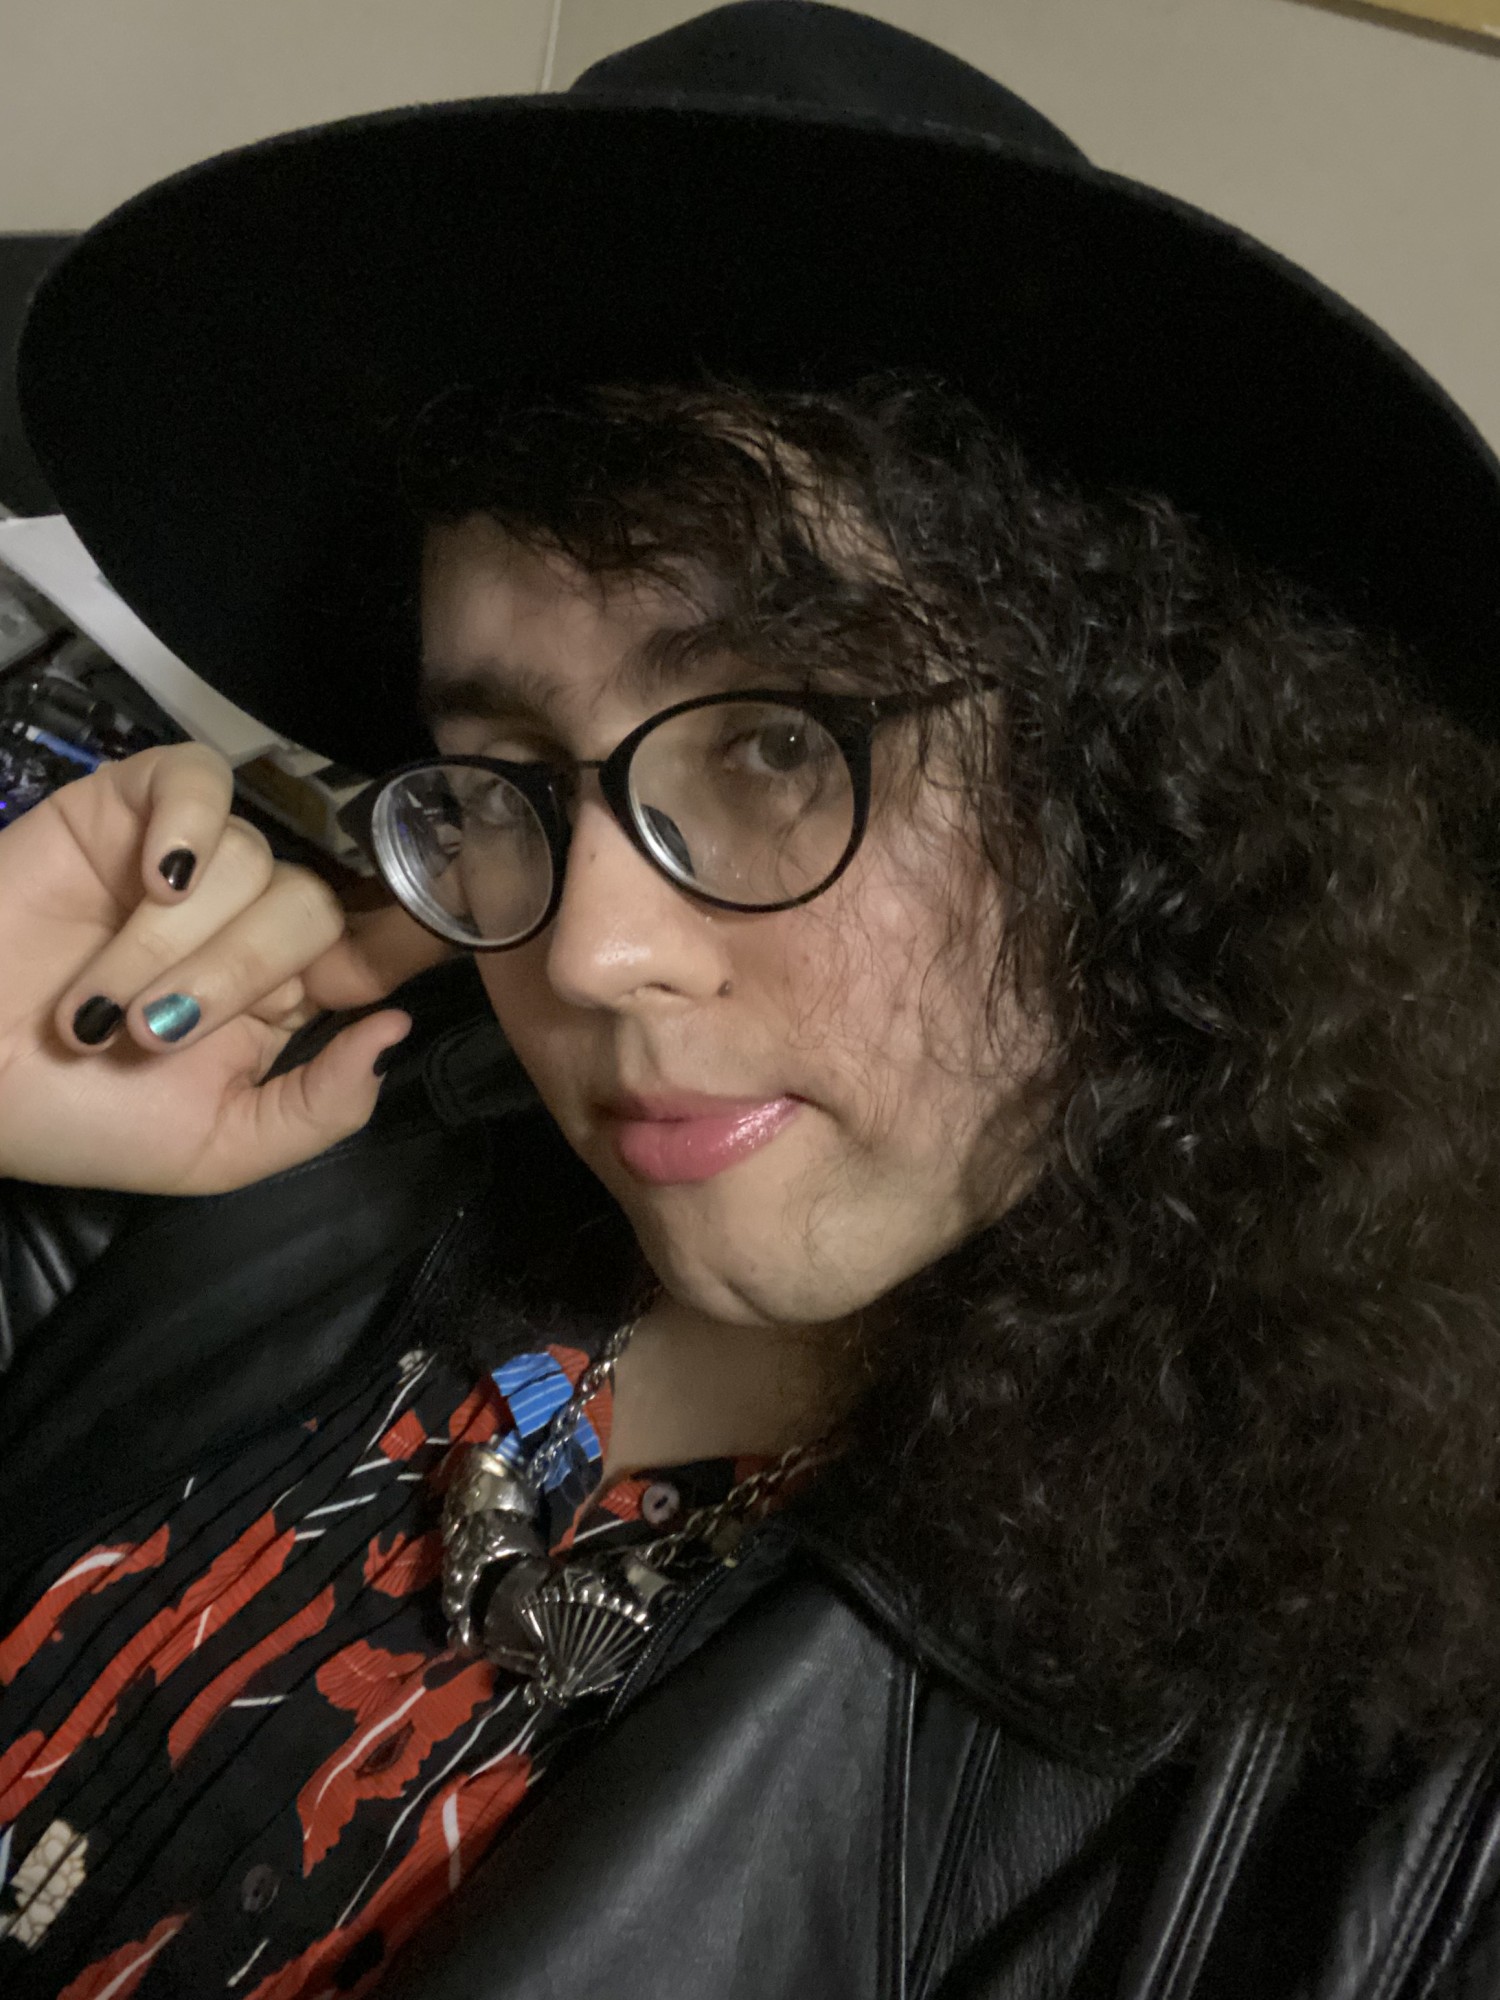 In this color portrait, Isa Guzman looks at the camera, her cheek resting on her hand, her nails painted a dark metallic green. Guzman is wearing a leather jacket, black glasses, and a large-brimmed black hat